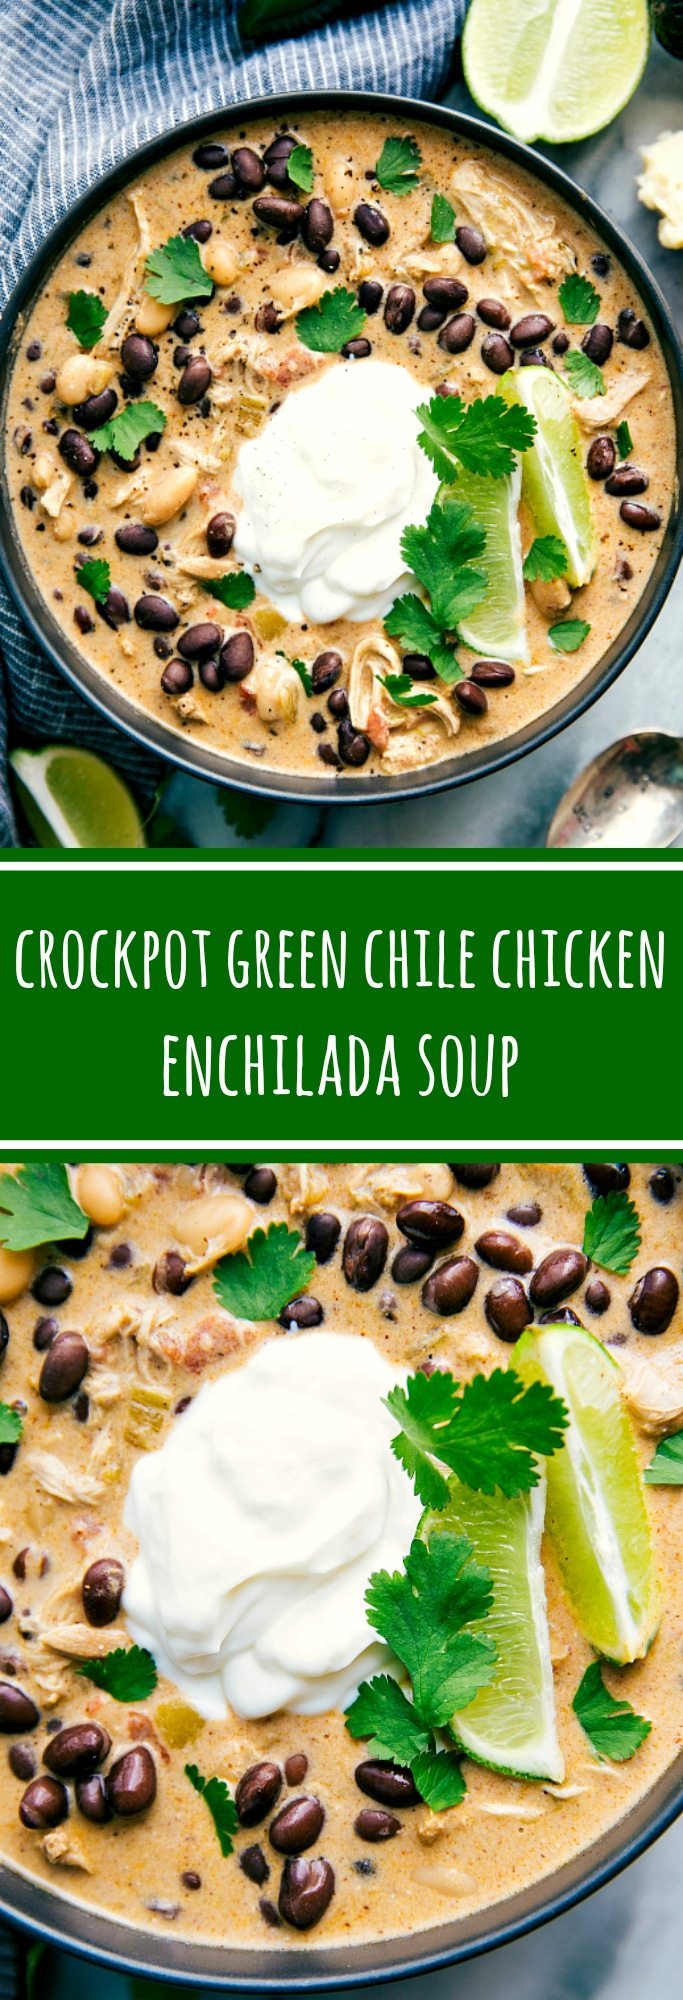 Crockpot Green Chile Chicken Enchilada Soup -- your favorite green chile chicken enchiladas in a creamy, delicious, and easy soup form